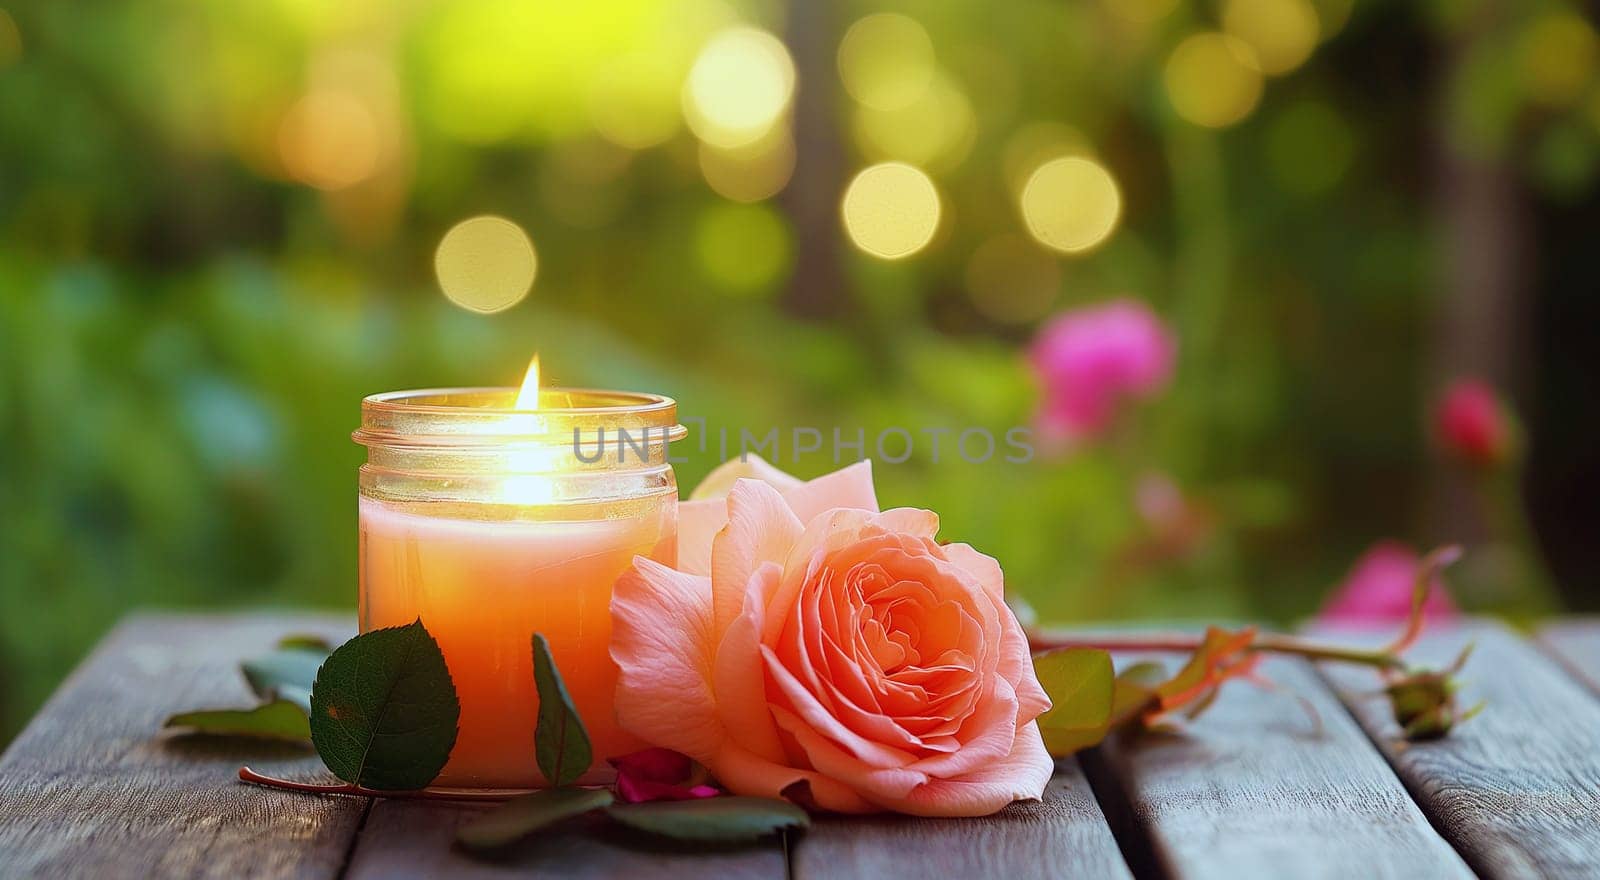 A lit scented candle in a glass jar beside a fresh pink rose on a wooden surface with a blurred natural green background. by kizuneko